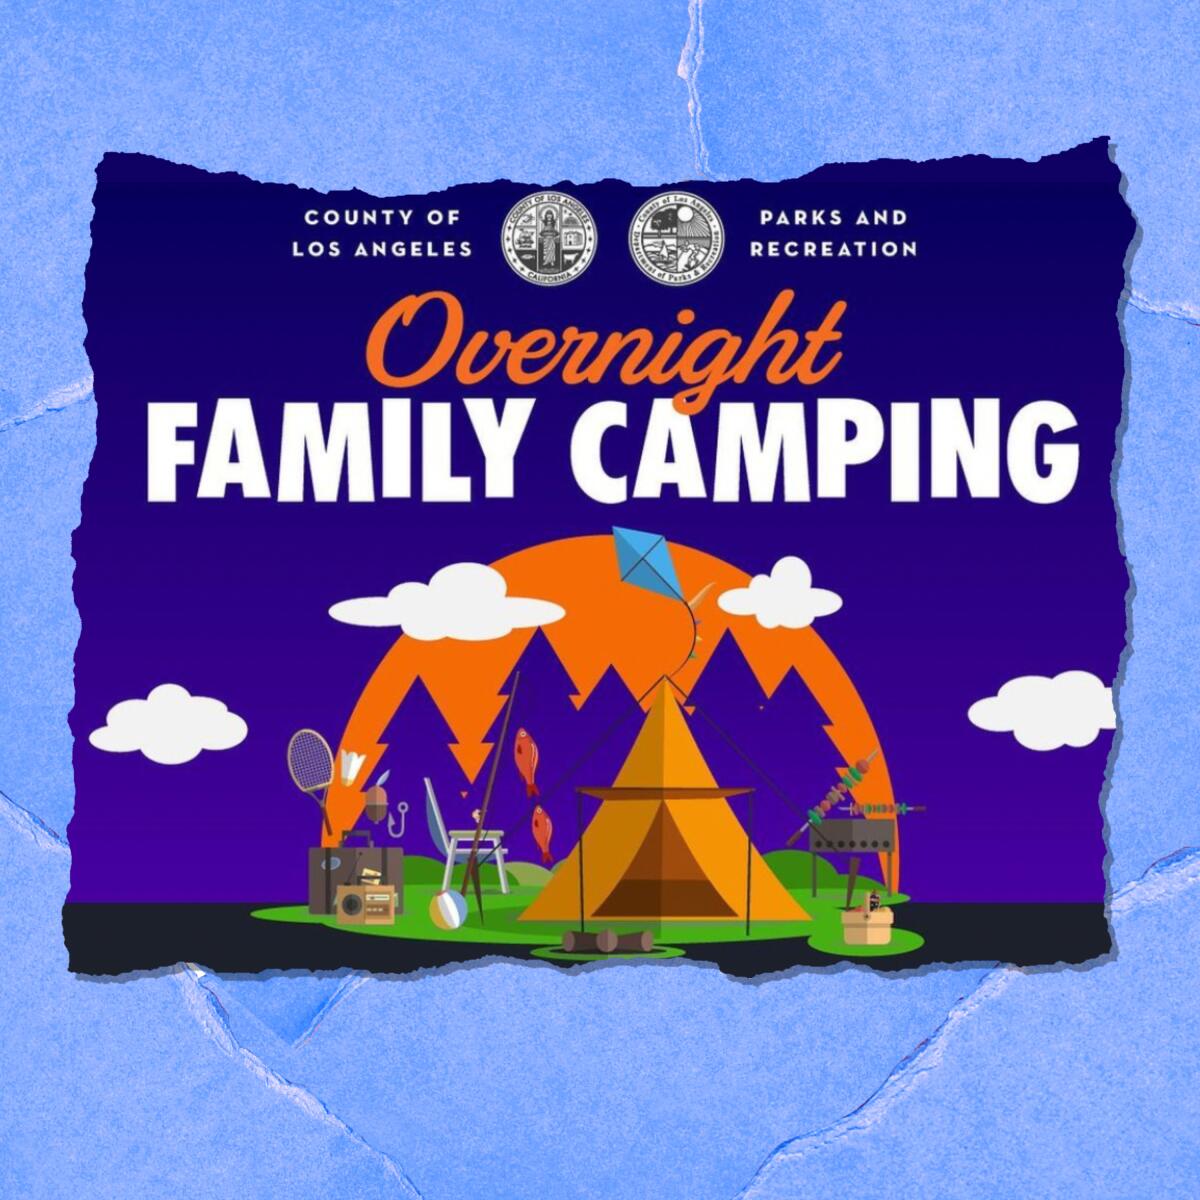 Overnight Family Camping posters